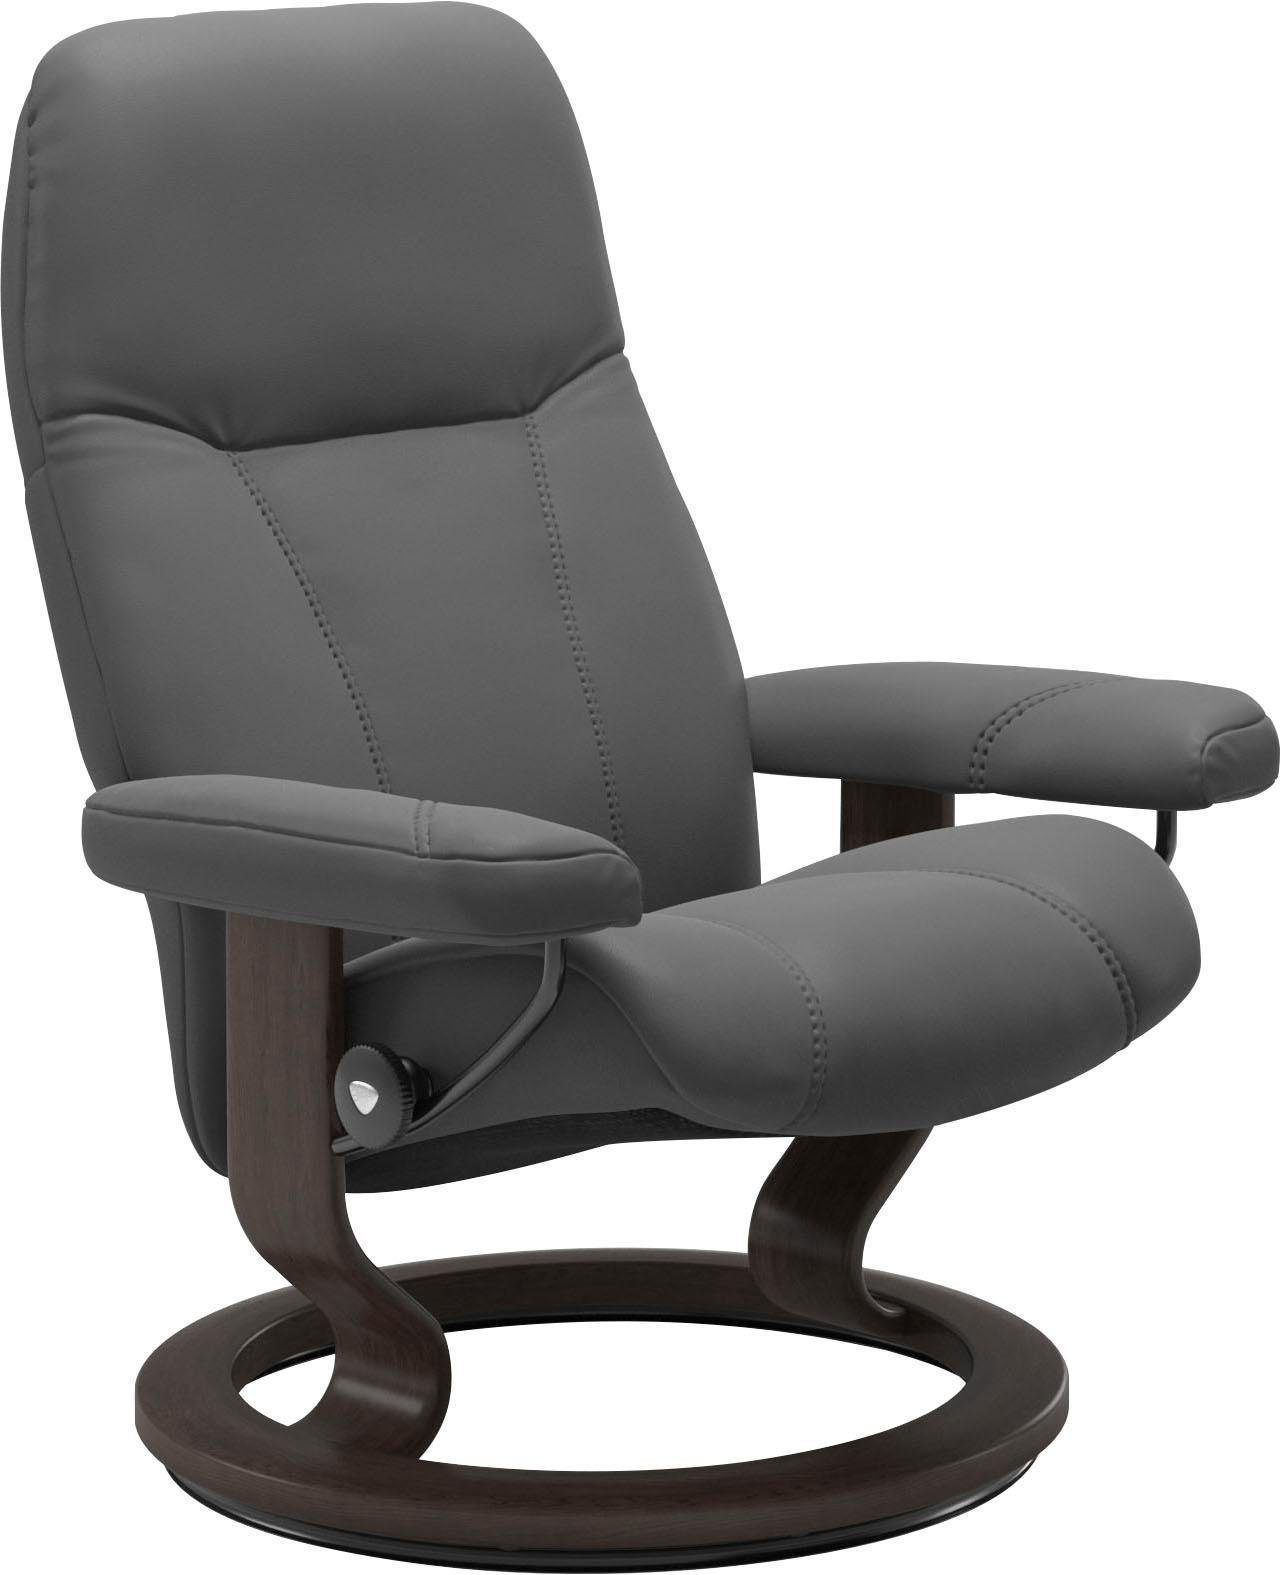 Classic Gestell Stressless® Base, M, Größe Consul, mit Relaxsessel Wenge